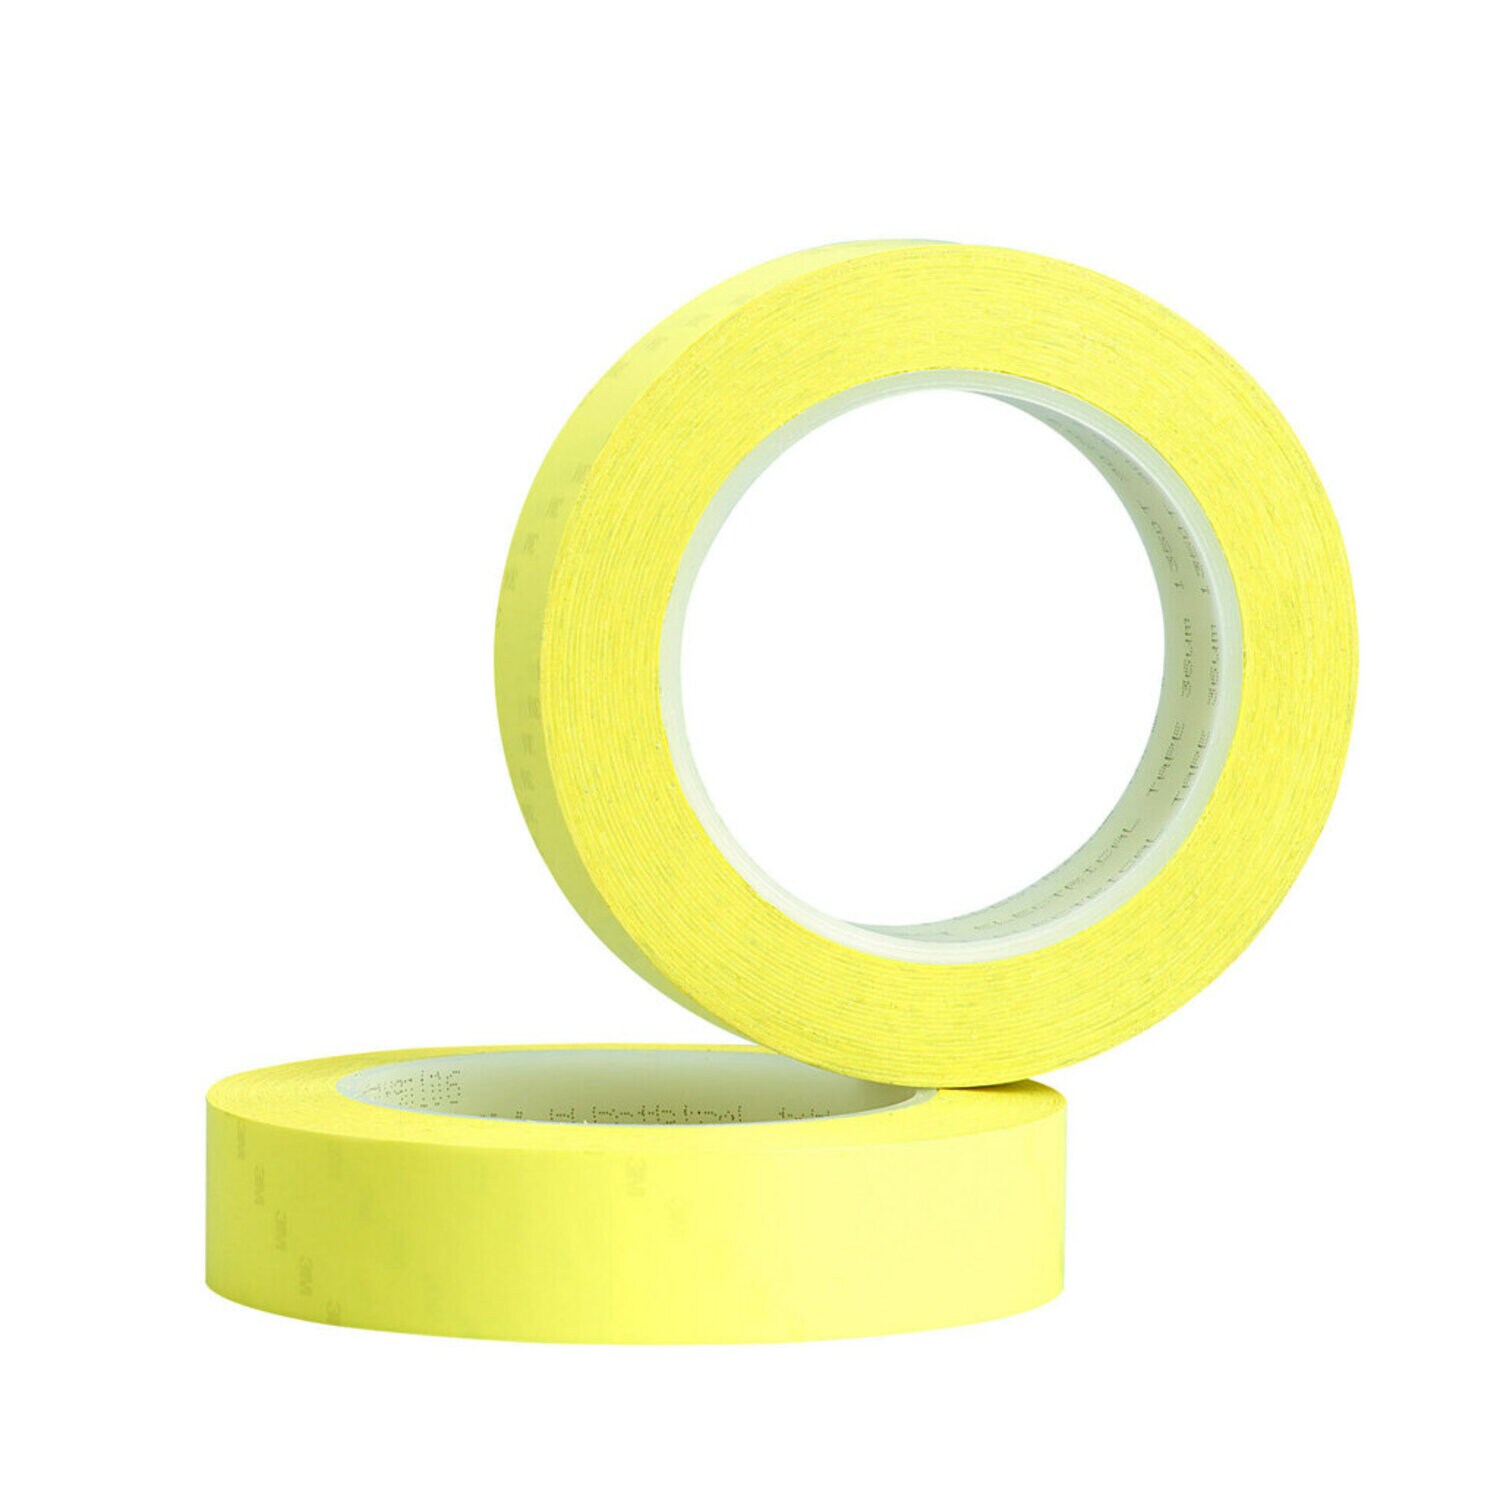 7010045329 - 3M Polyester Film Electrical Tape 74, 1/2 in x 72 yd, Yellow, 72
Rolls/Case